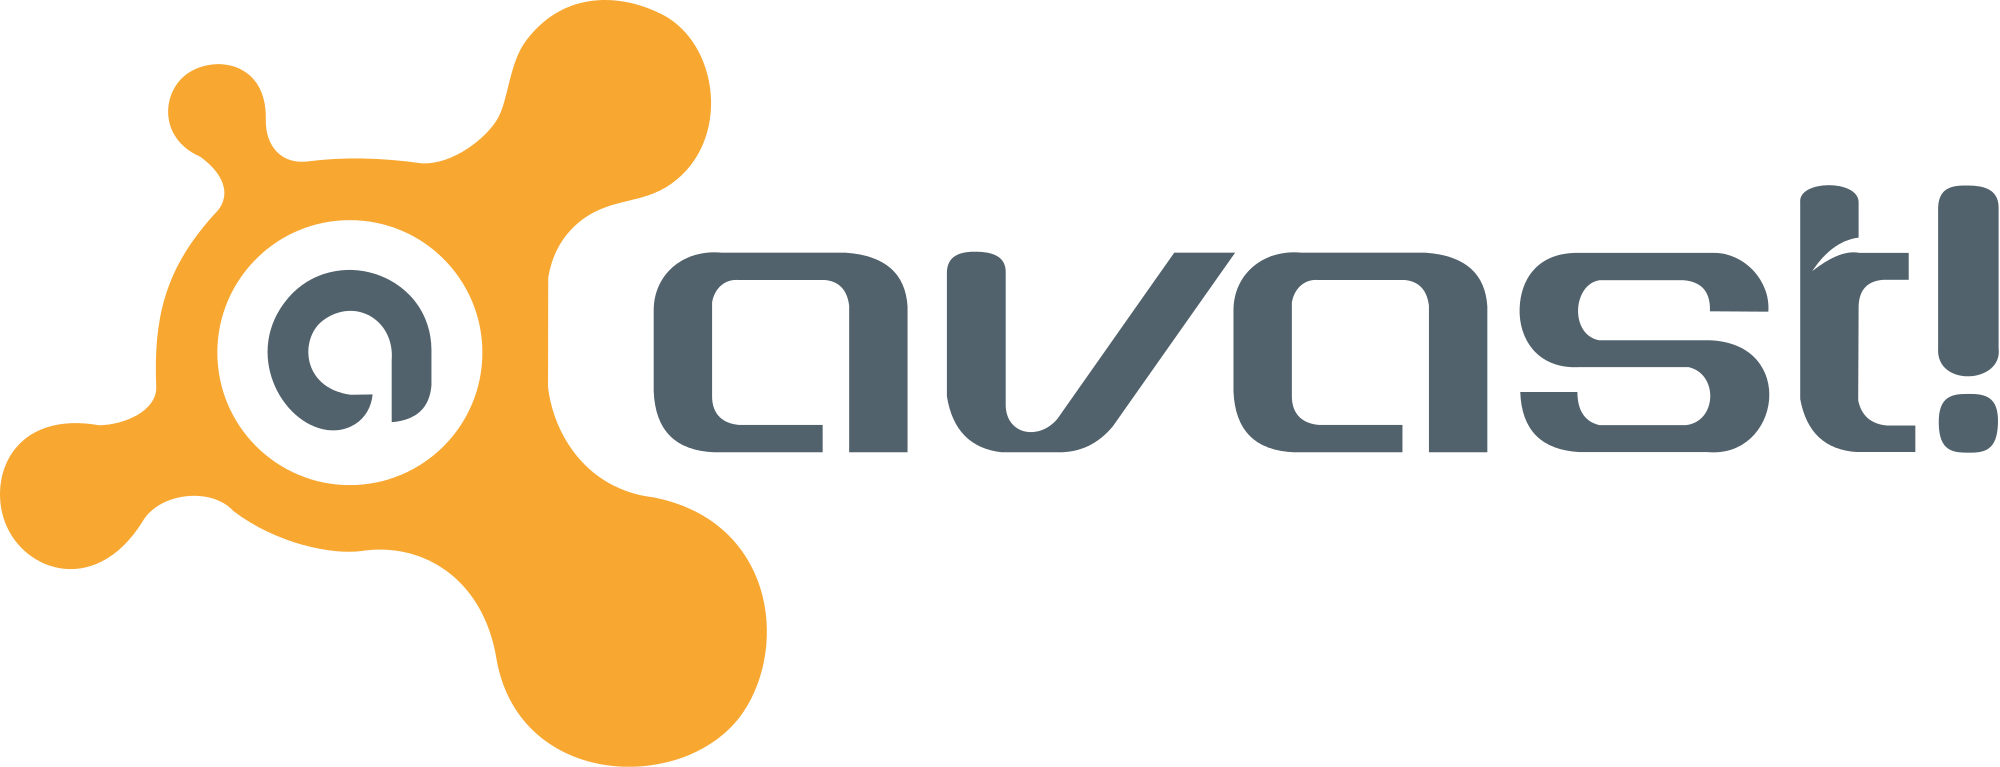 avast icon. Download PNG